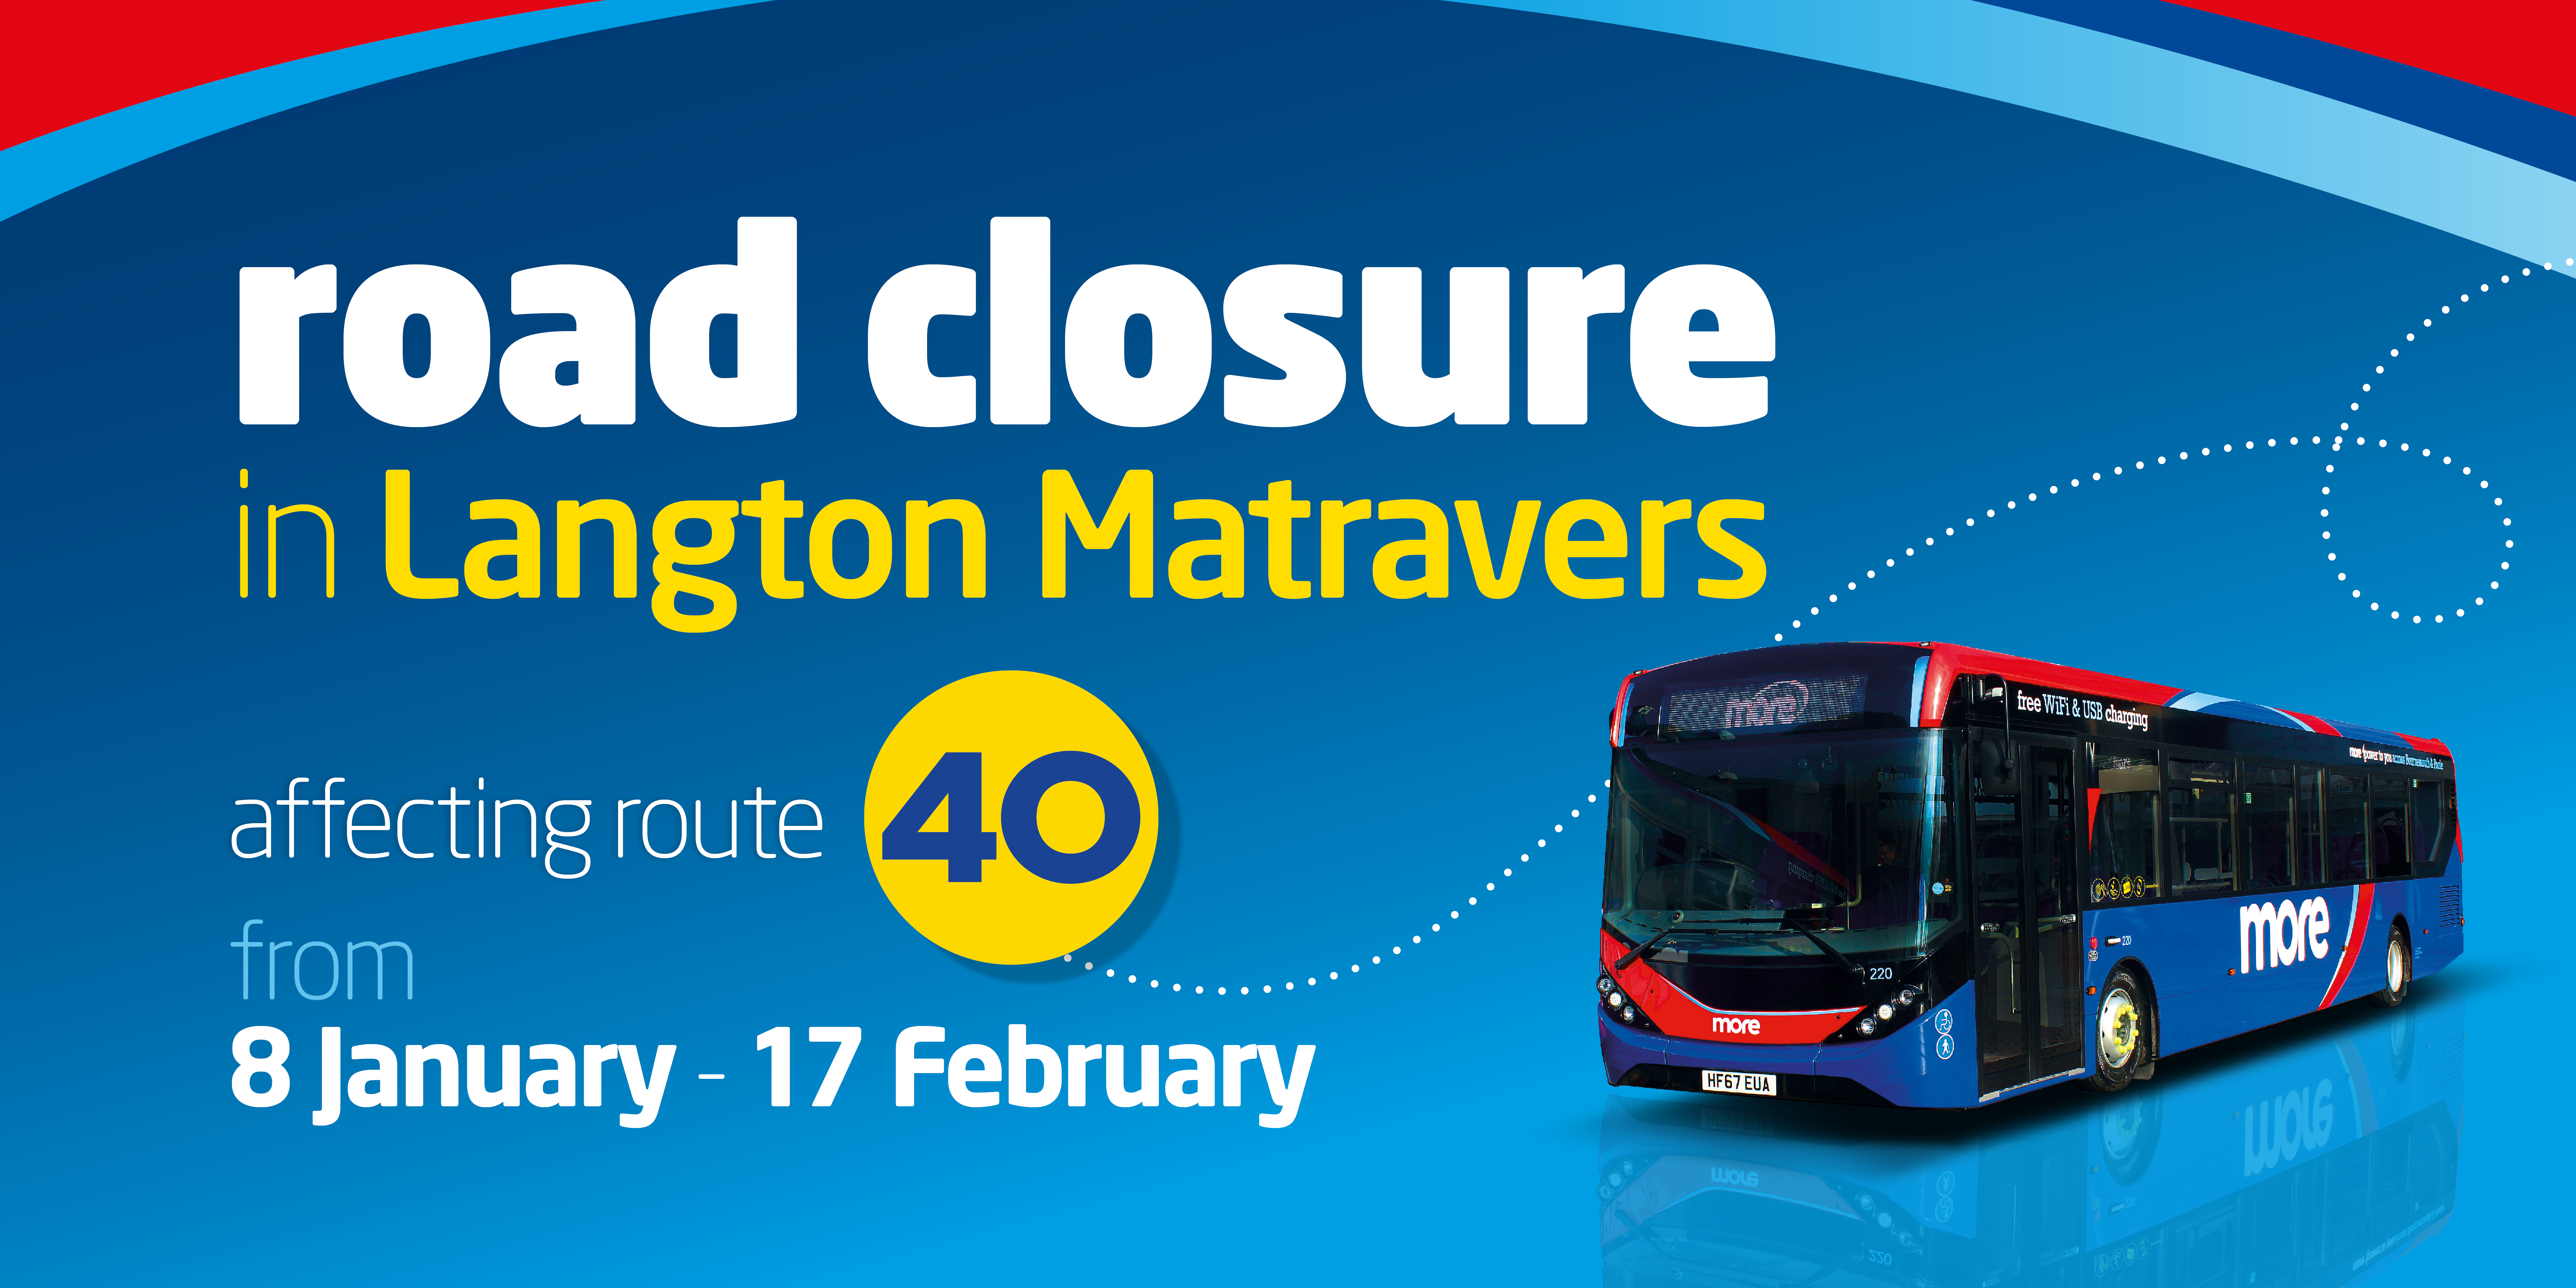 road closure in Langton Matravers affecting route 40 image with a morebus